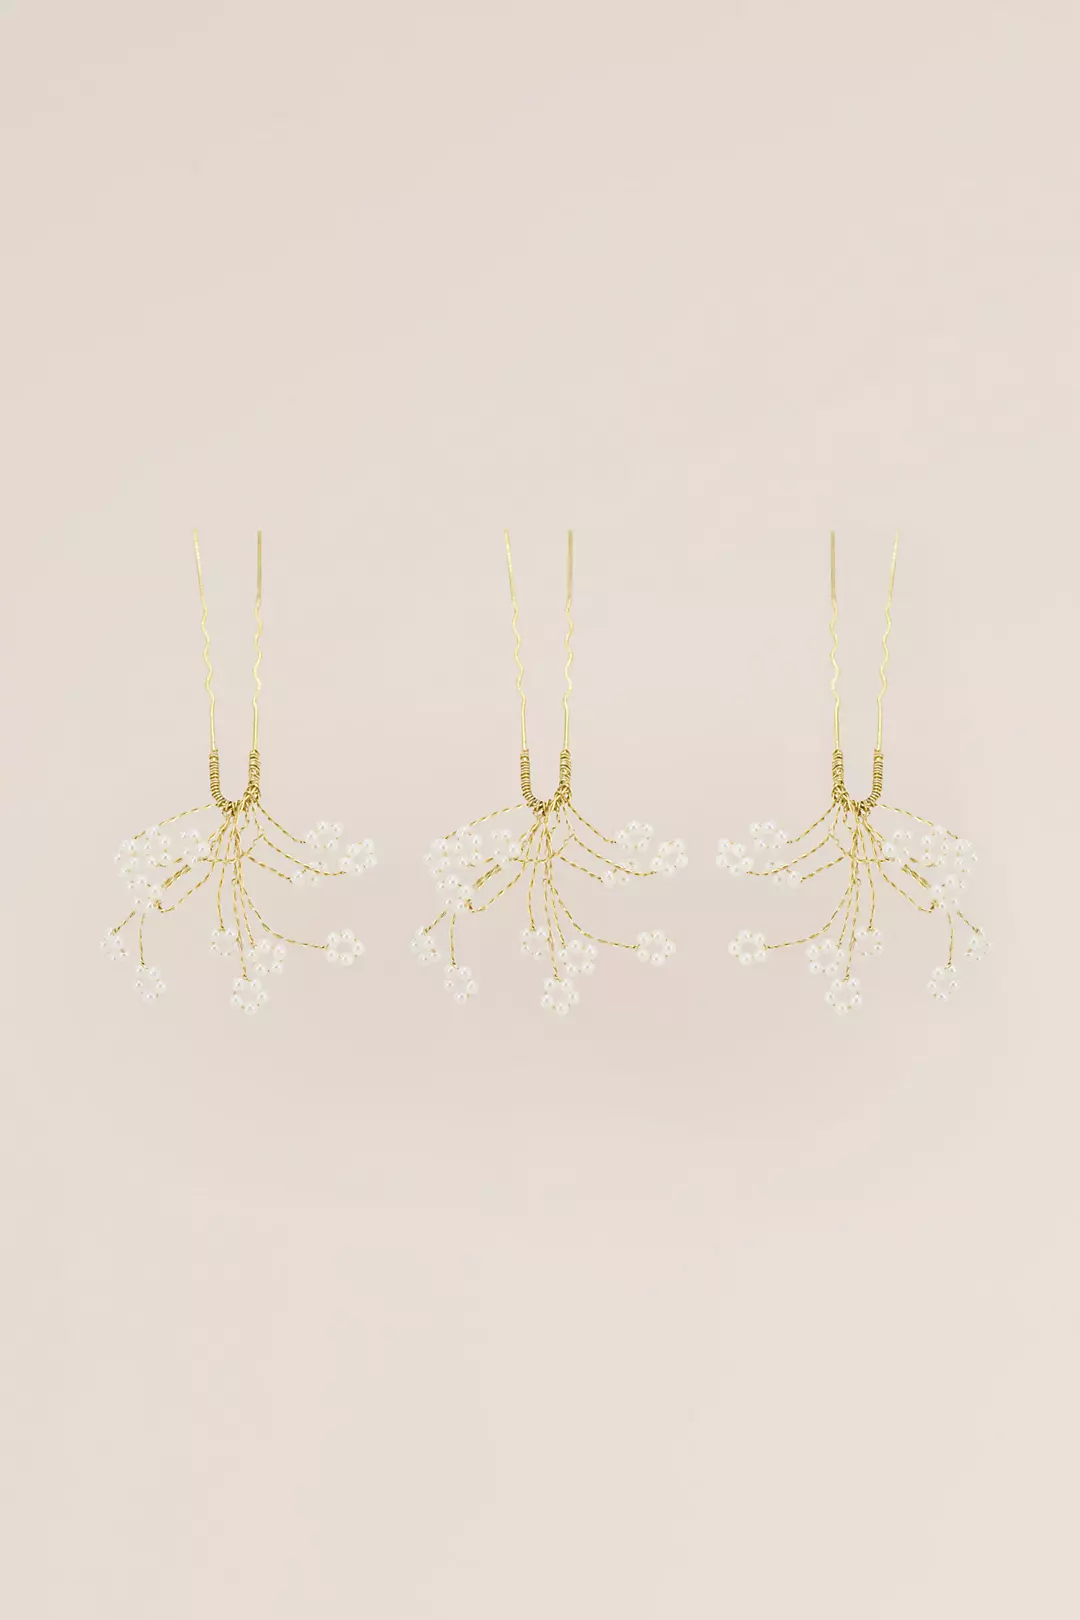 Tiny Crystal Daisy Hand-Wired Hairpin Set Image